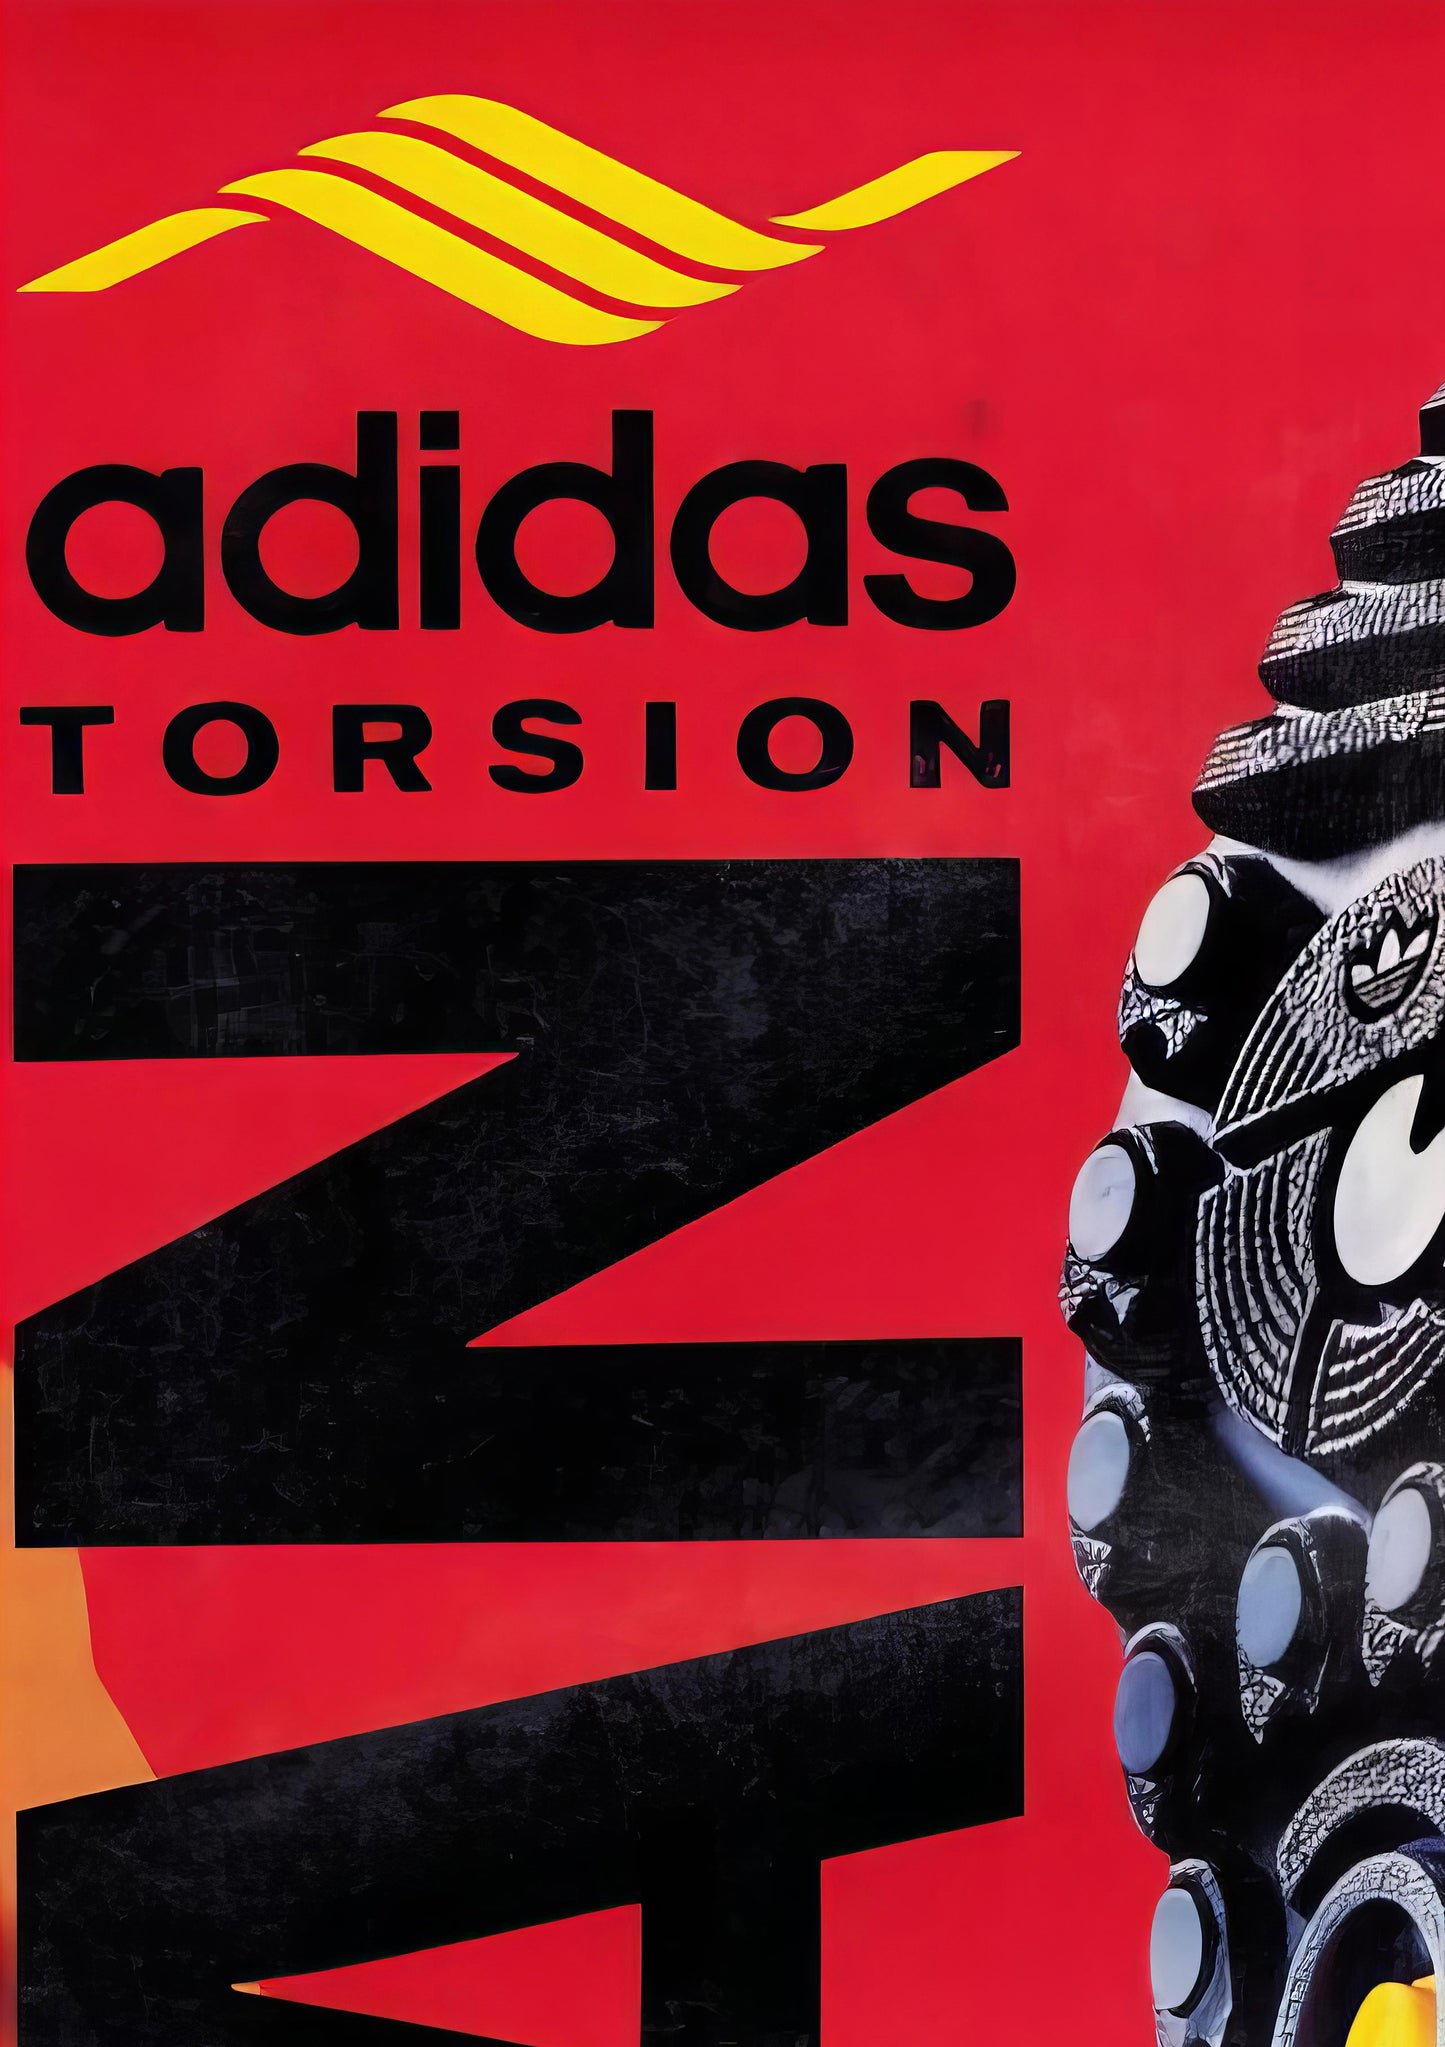 Adidas ZX8 Torsion "I Want I Can" 1989 Poster